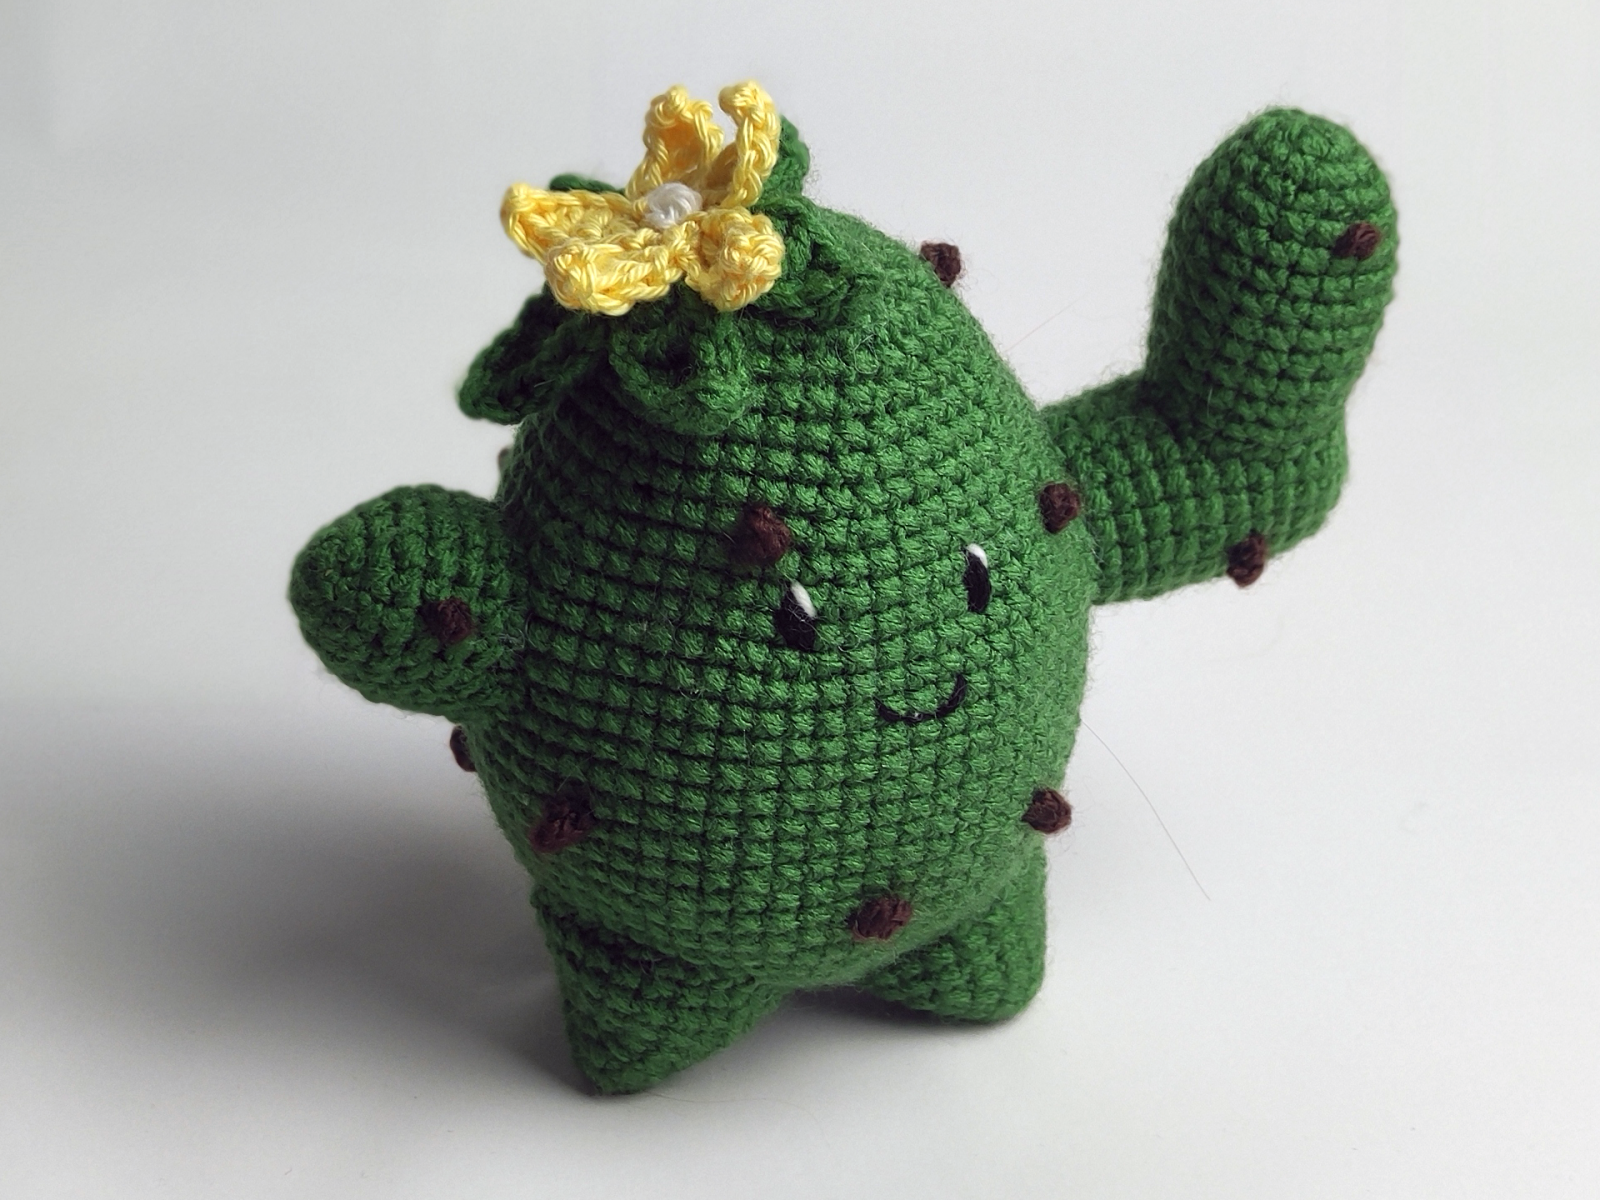 Blog content image for 'Little Cactus'